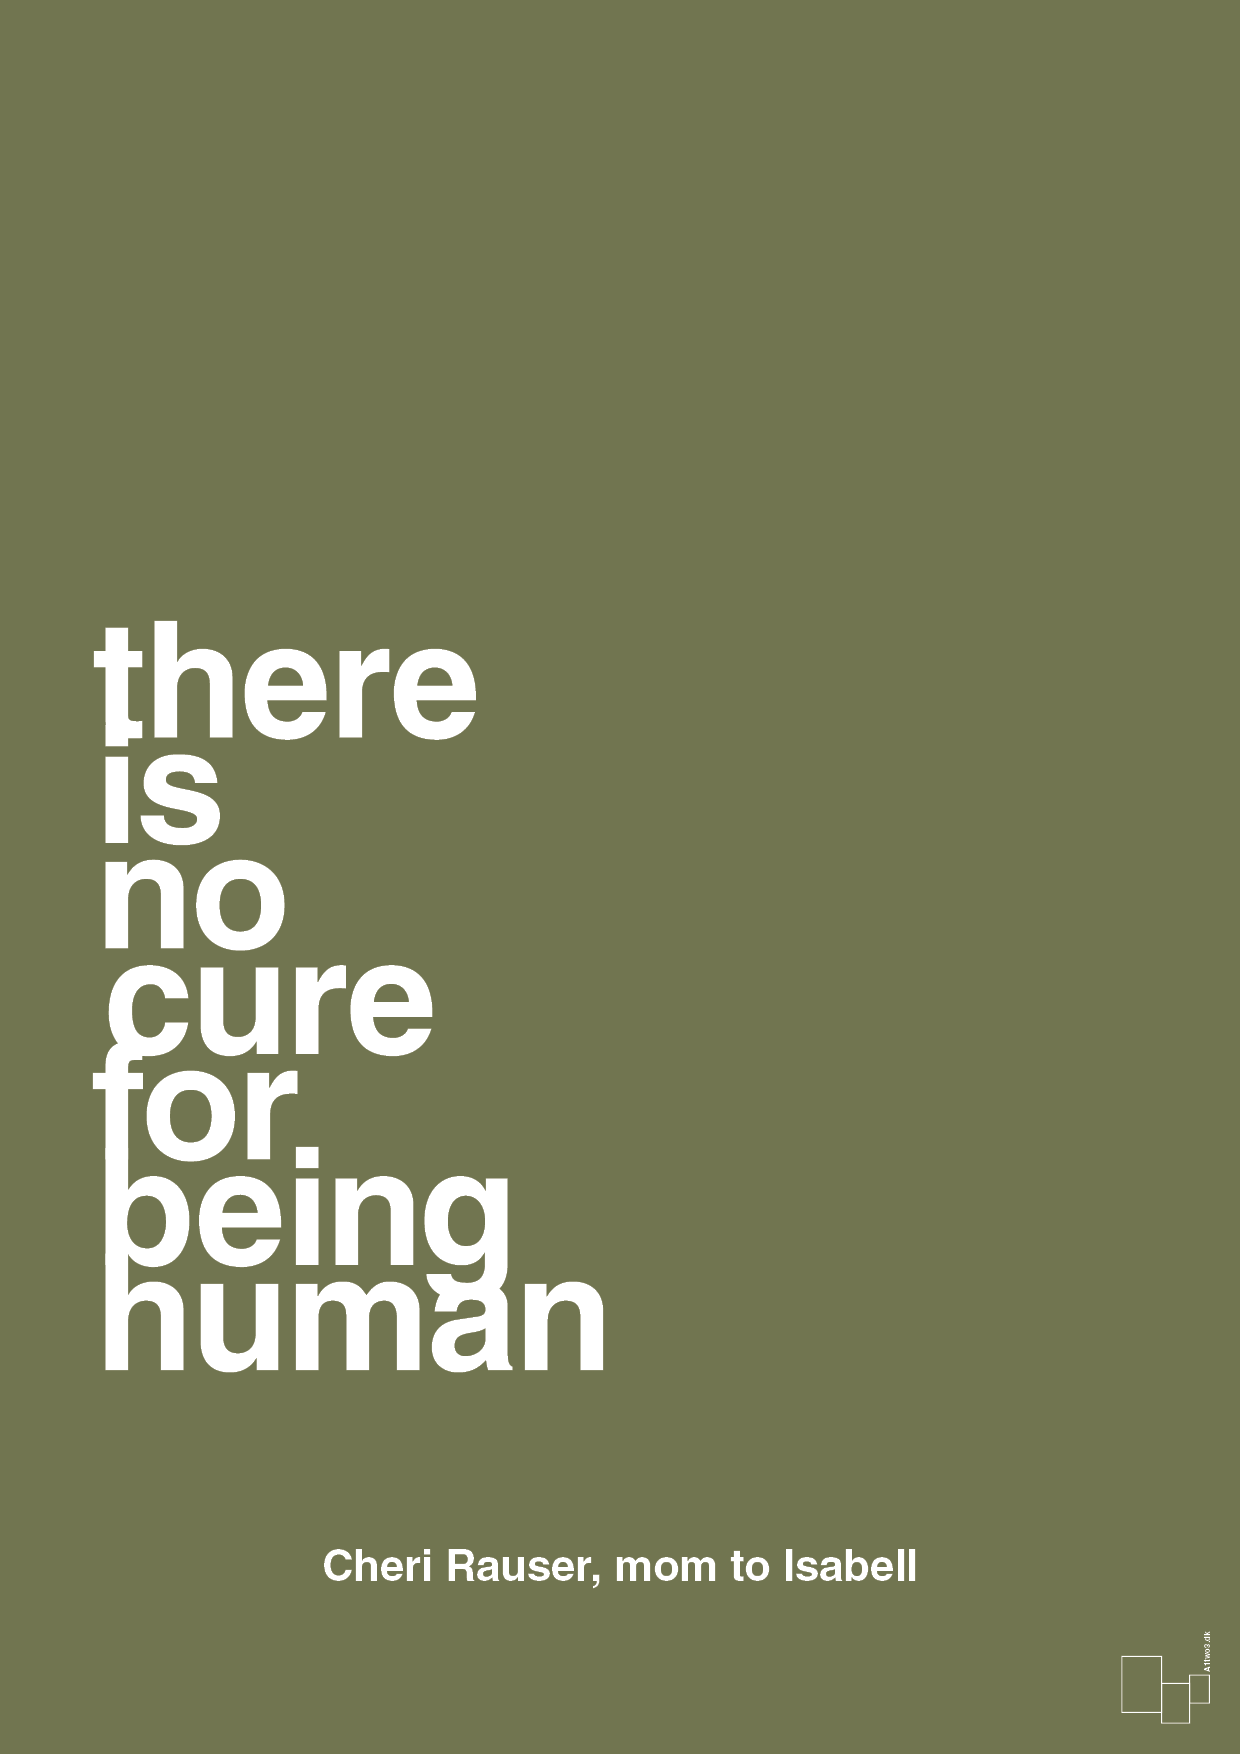 there is no cure for being human - Plakat med Samfund i Secret Meadow